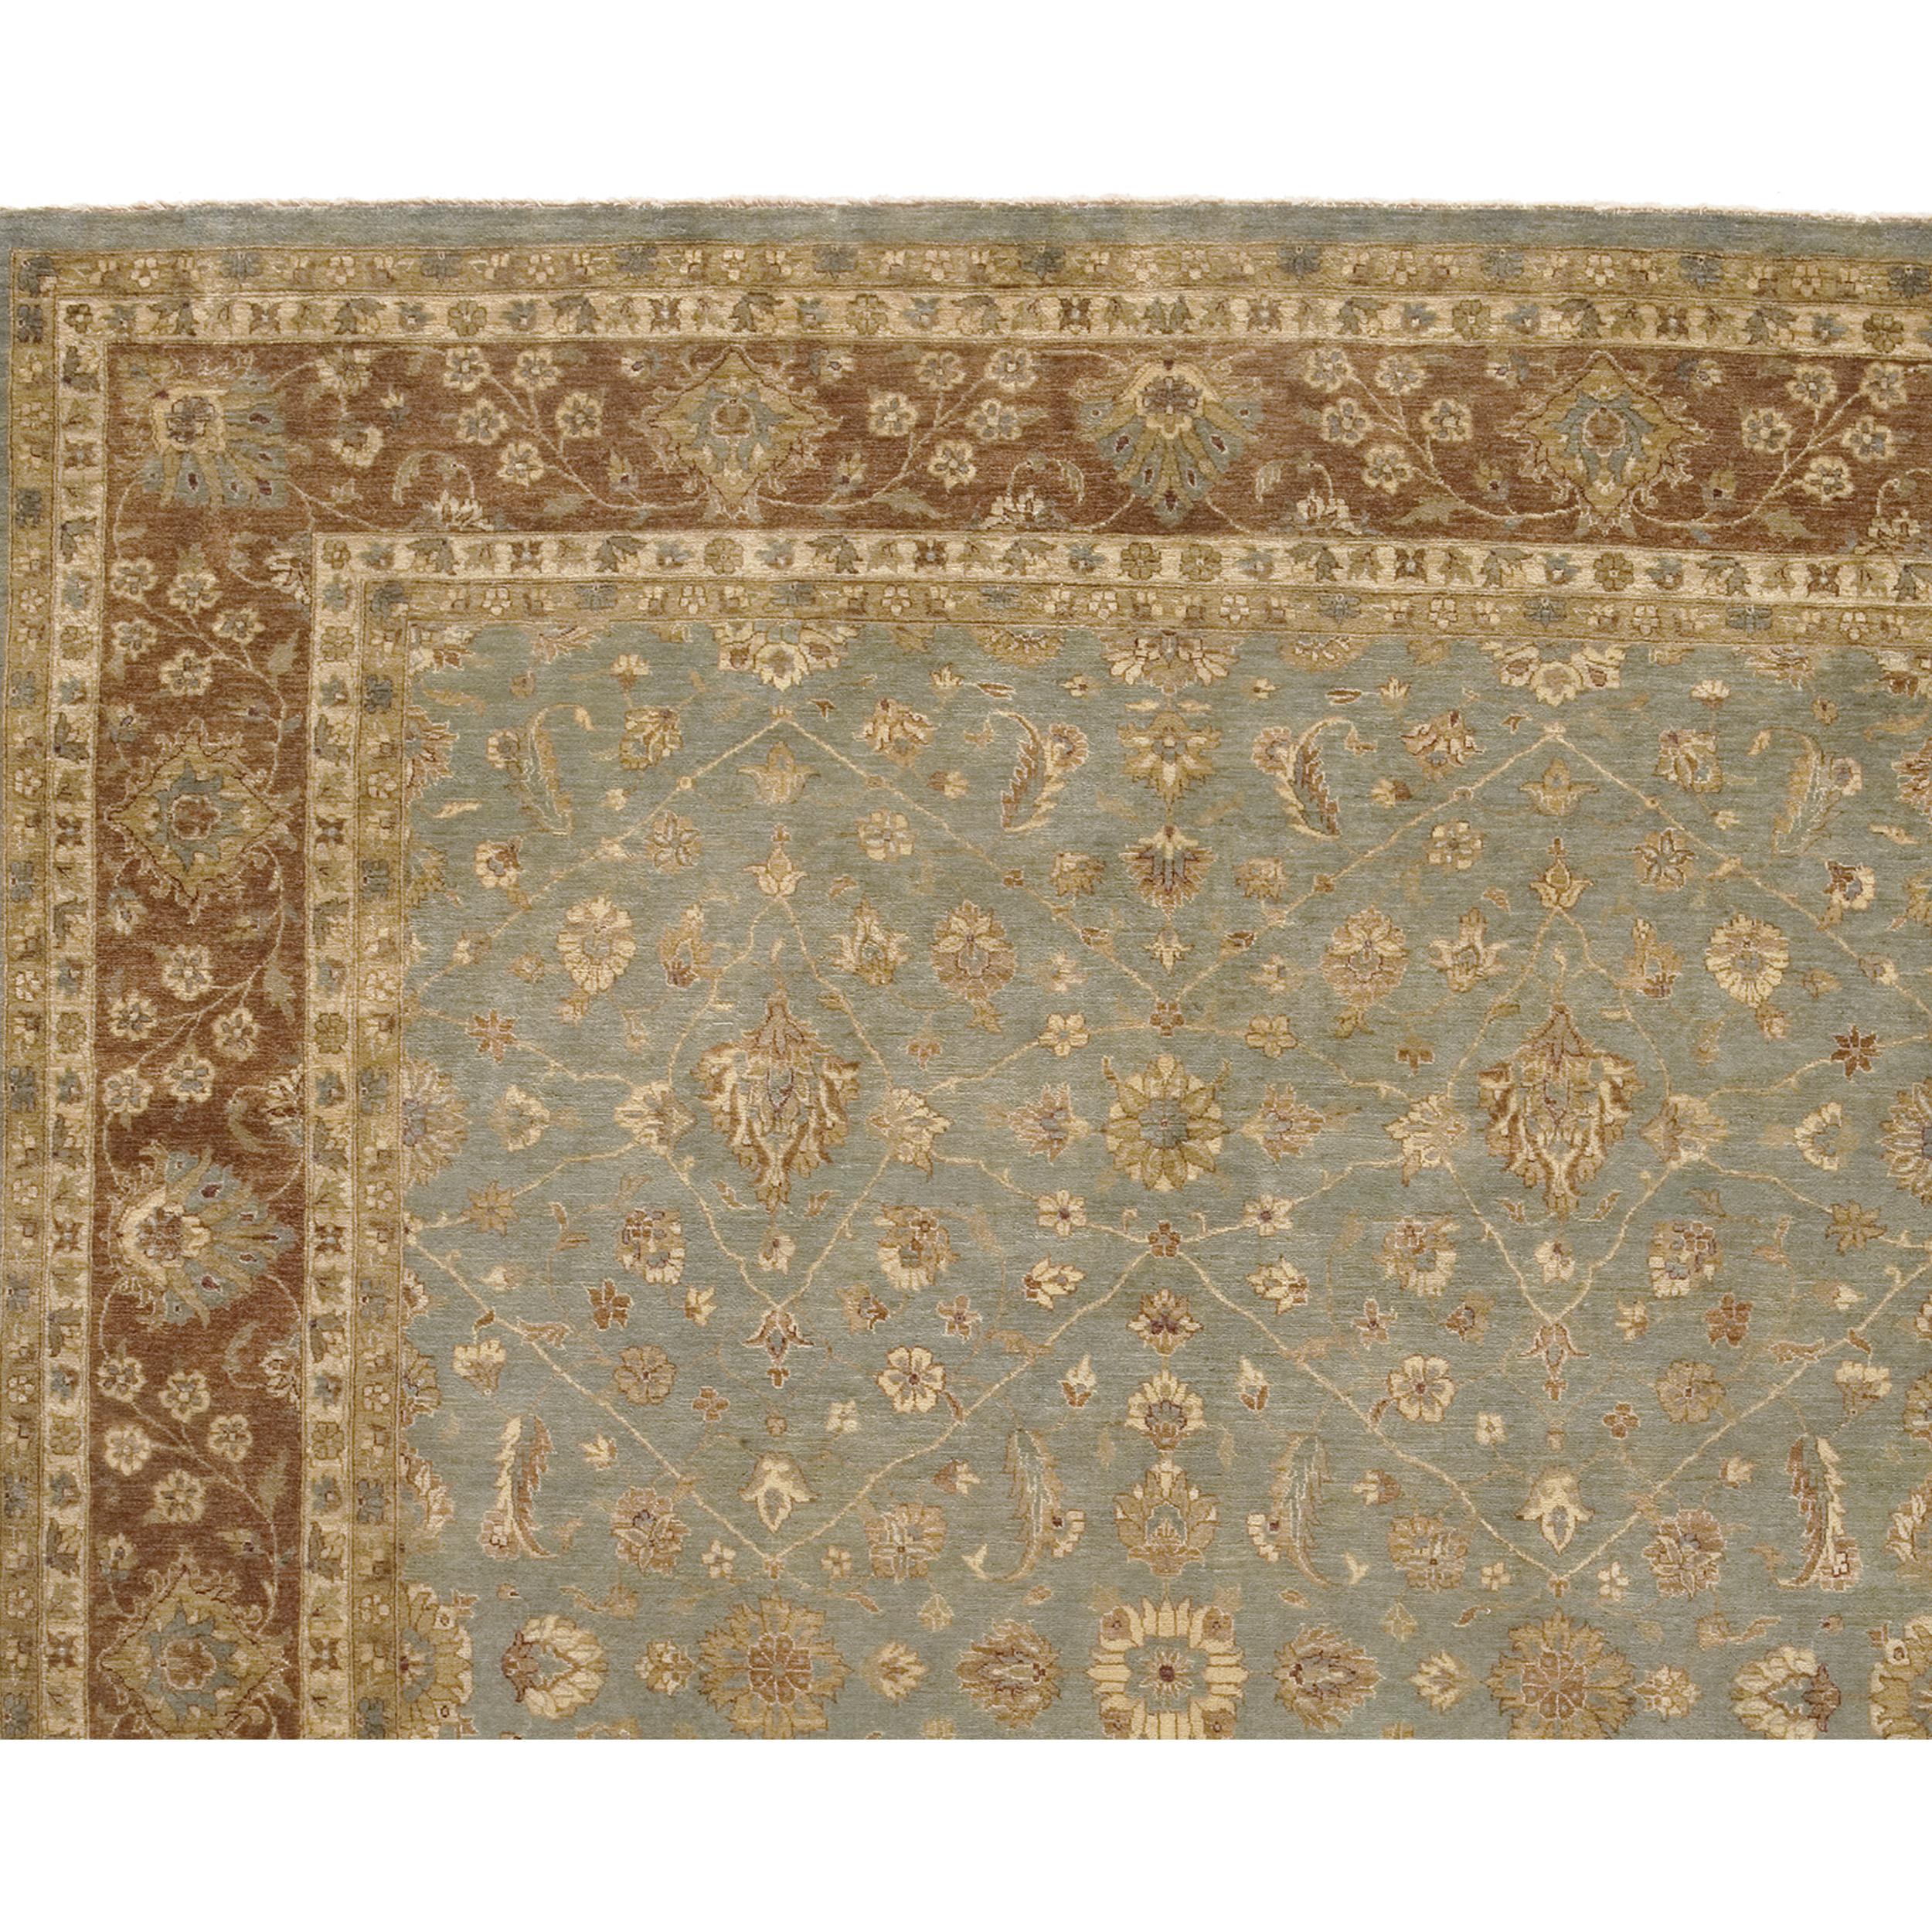 Luxury Traditional Hand-Knotted Polonaise Light Blue and Brown 12x18 Rug In New Condition For Sale In Secaucus, NJ